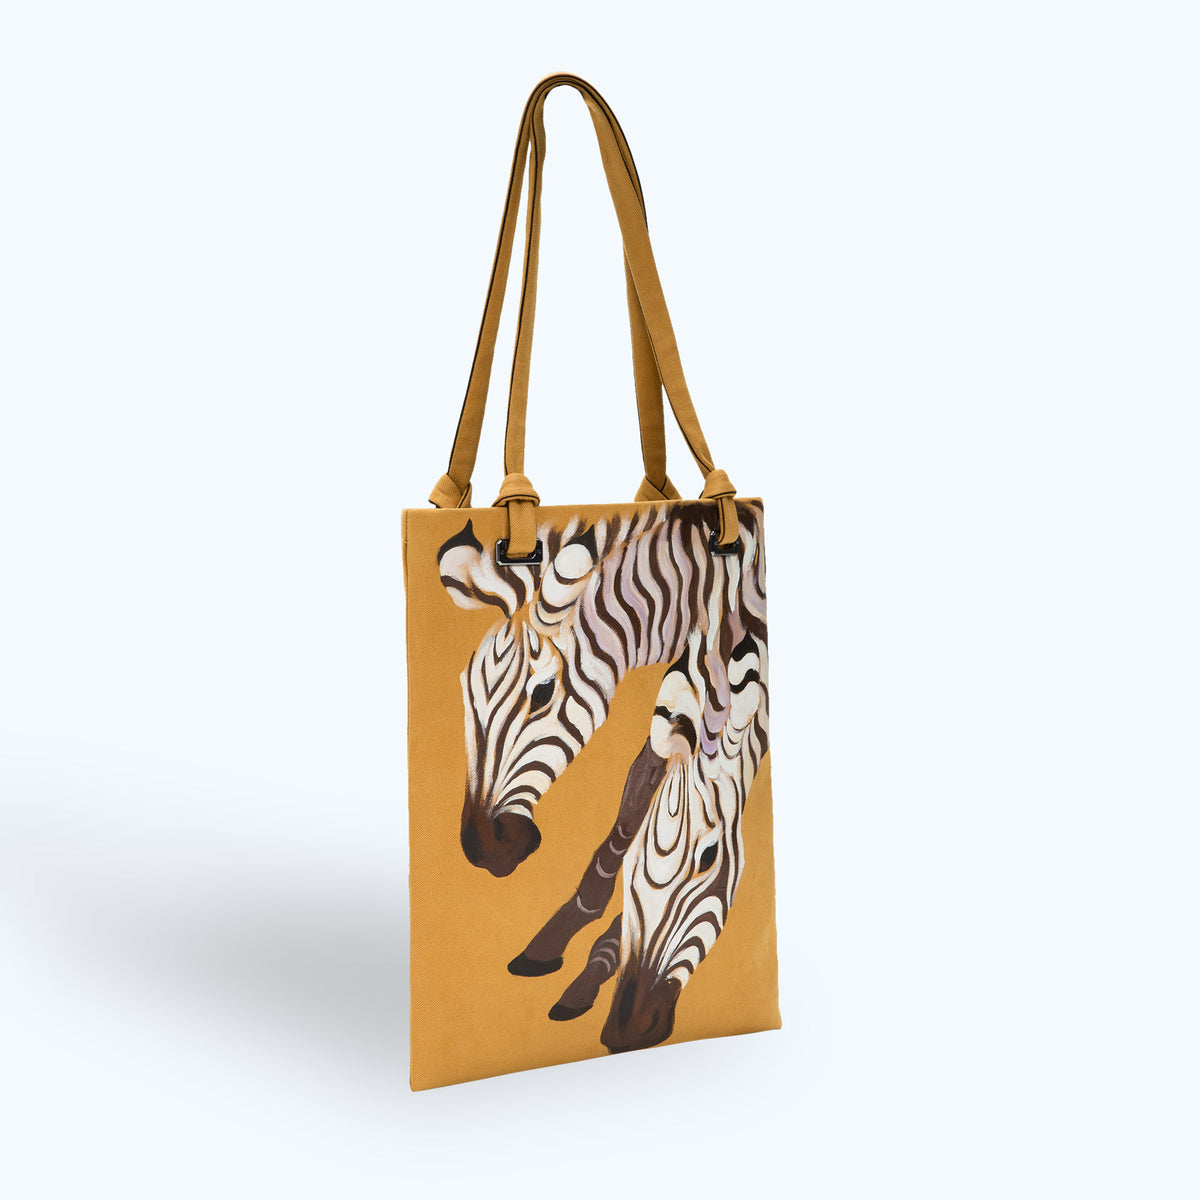 Zebras-painted Cloth Tote Bag